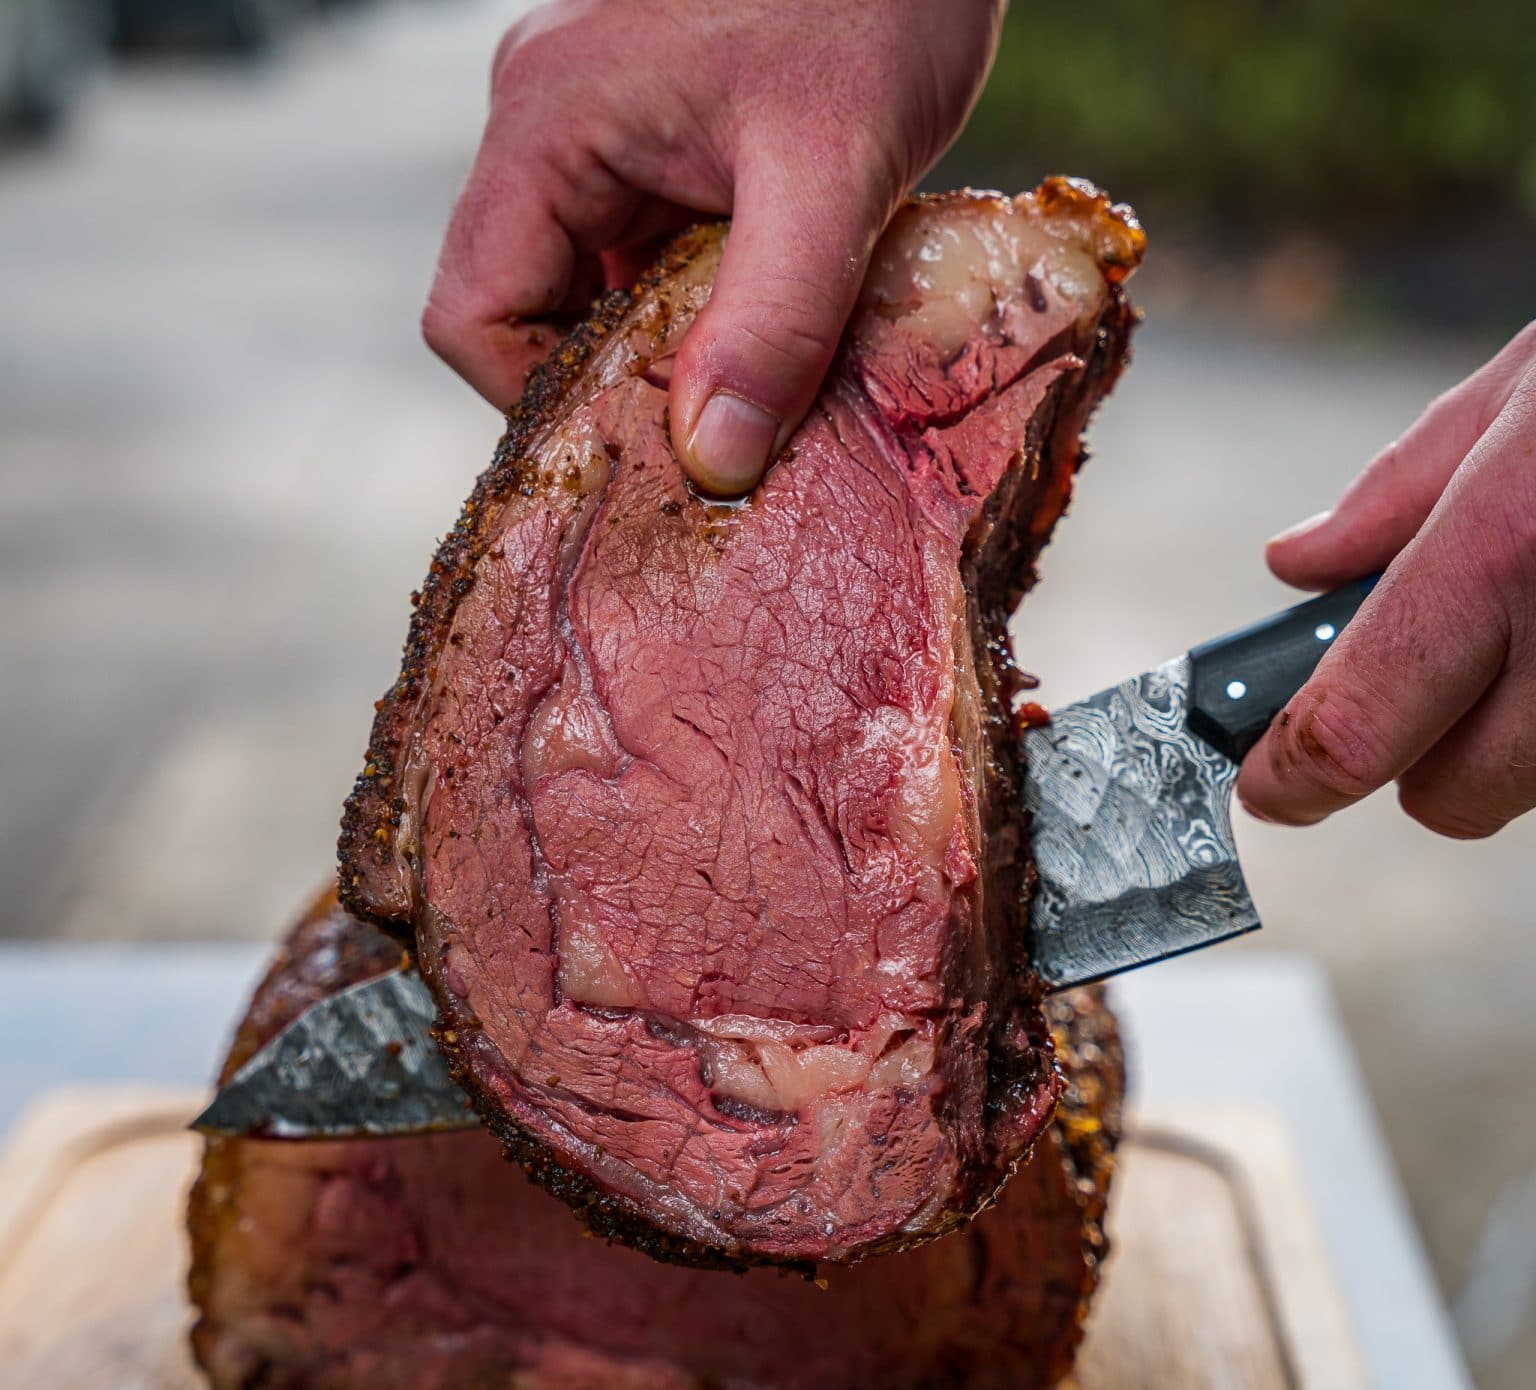 Perfect Pellet Grill Smoked Prime Rib Roast Grilling 24x7